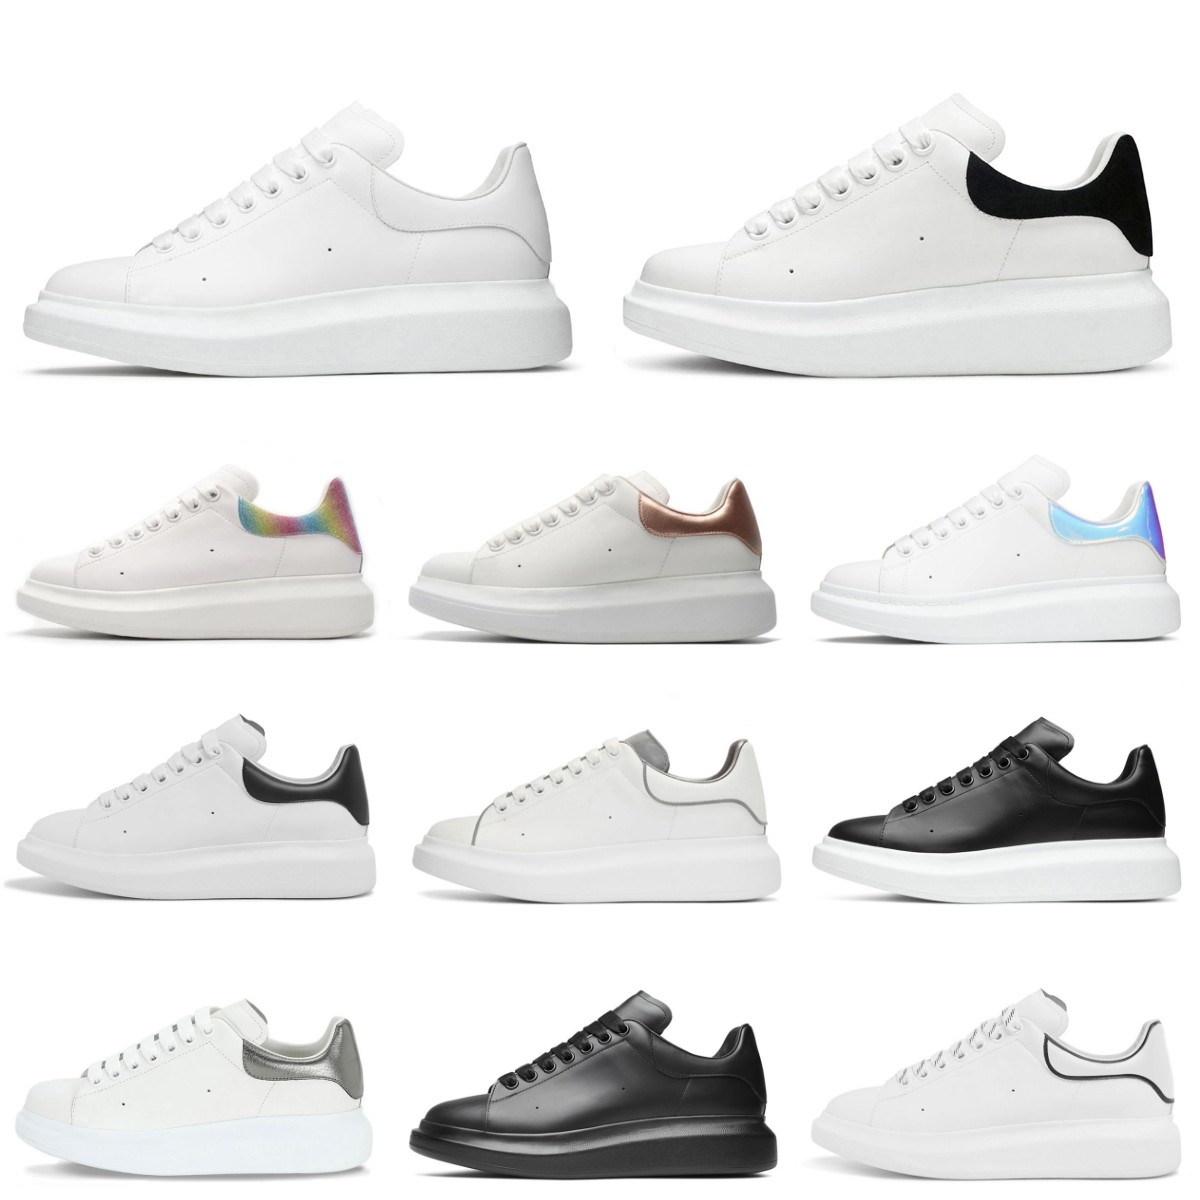 

Designers Oversized Mens Casual Shoes Velvet Espadrilles Train White Black Leather Women Flats Lace Up Platform Alexanders Increased Queens Mcqueens Sneakers S29, Please contact us